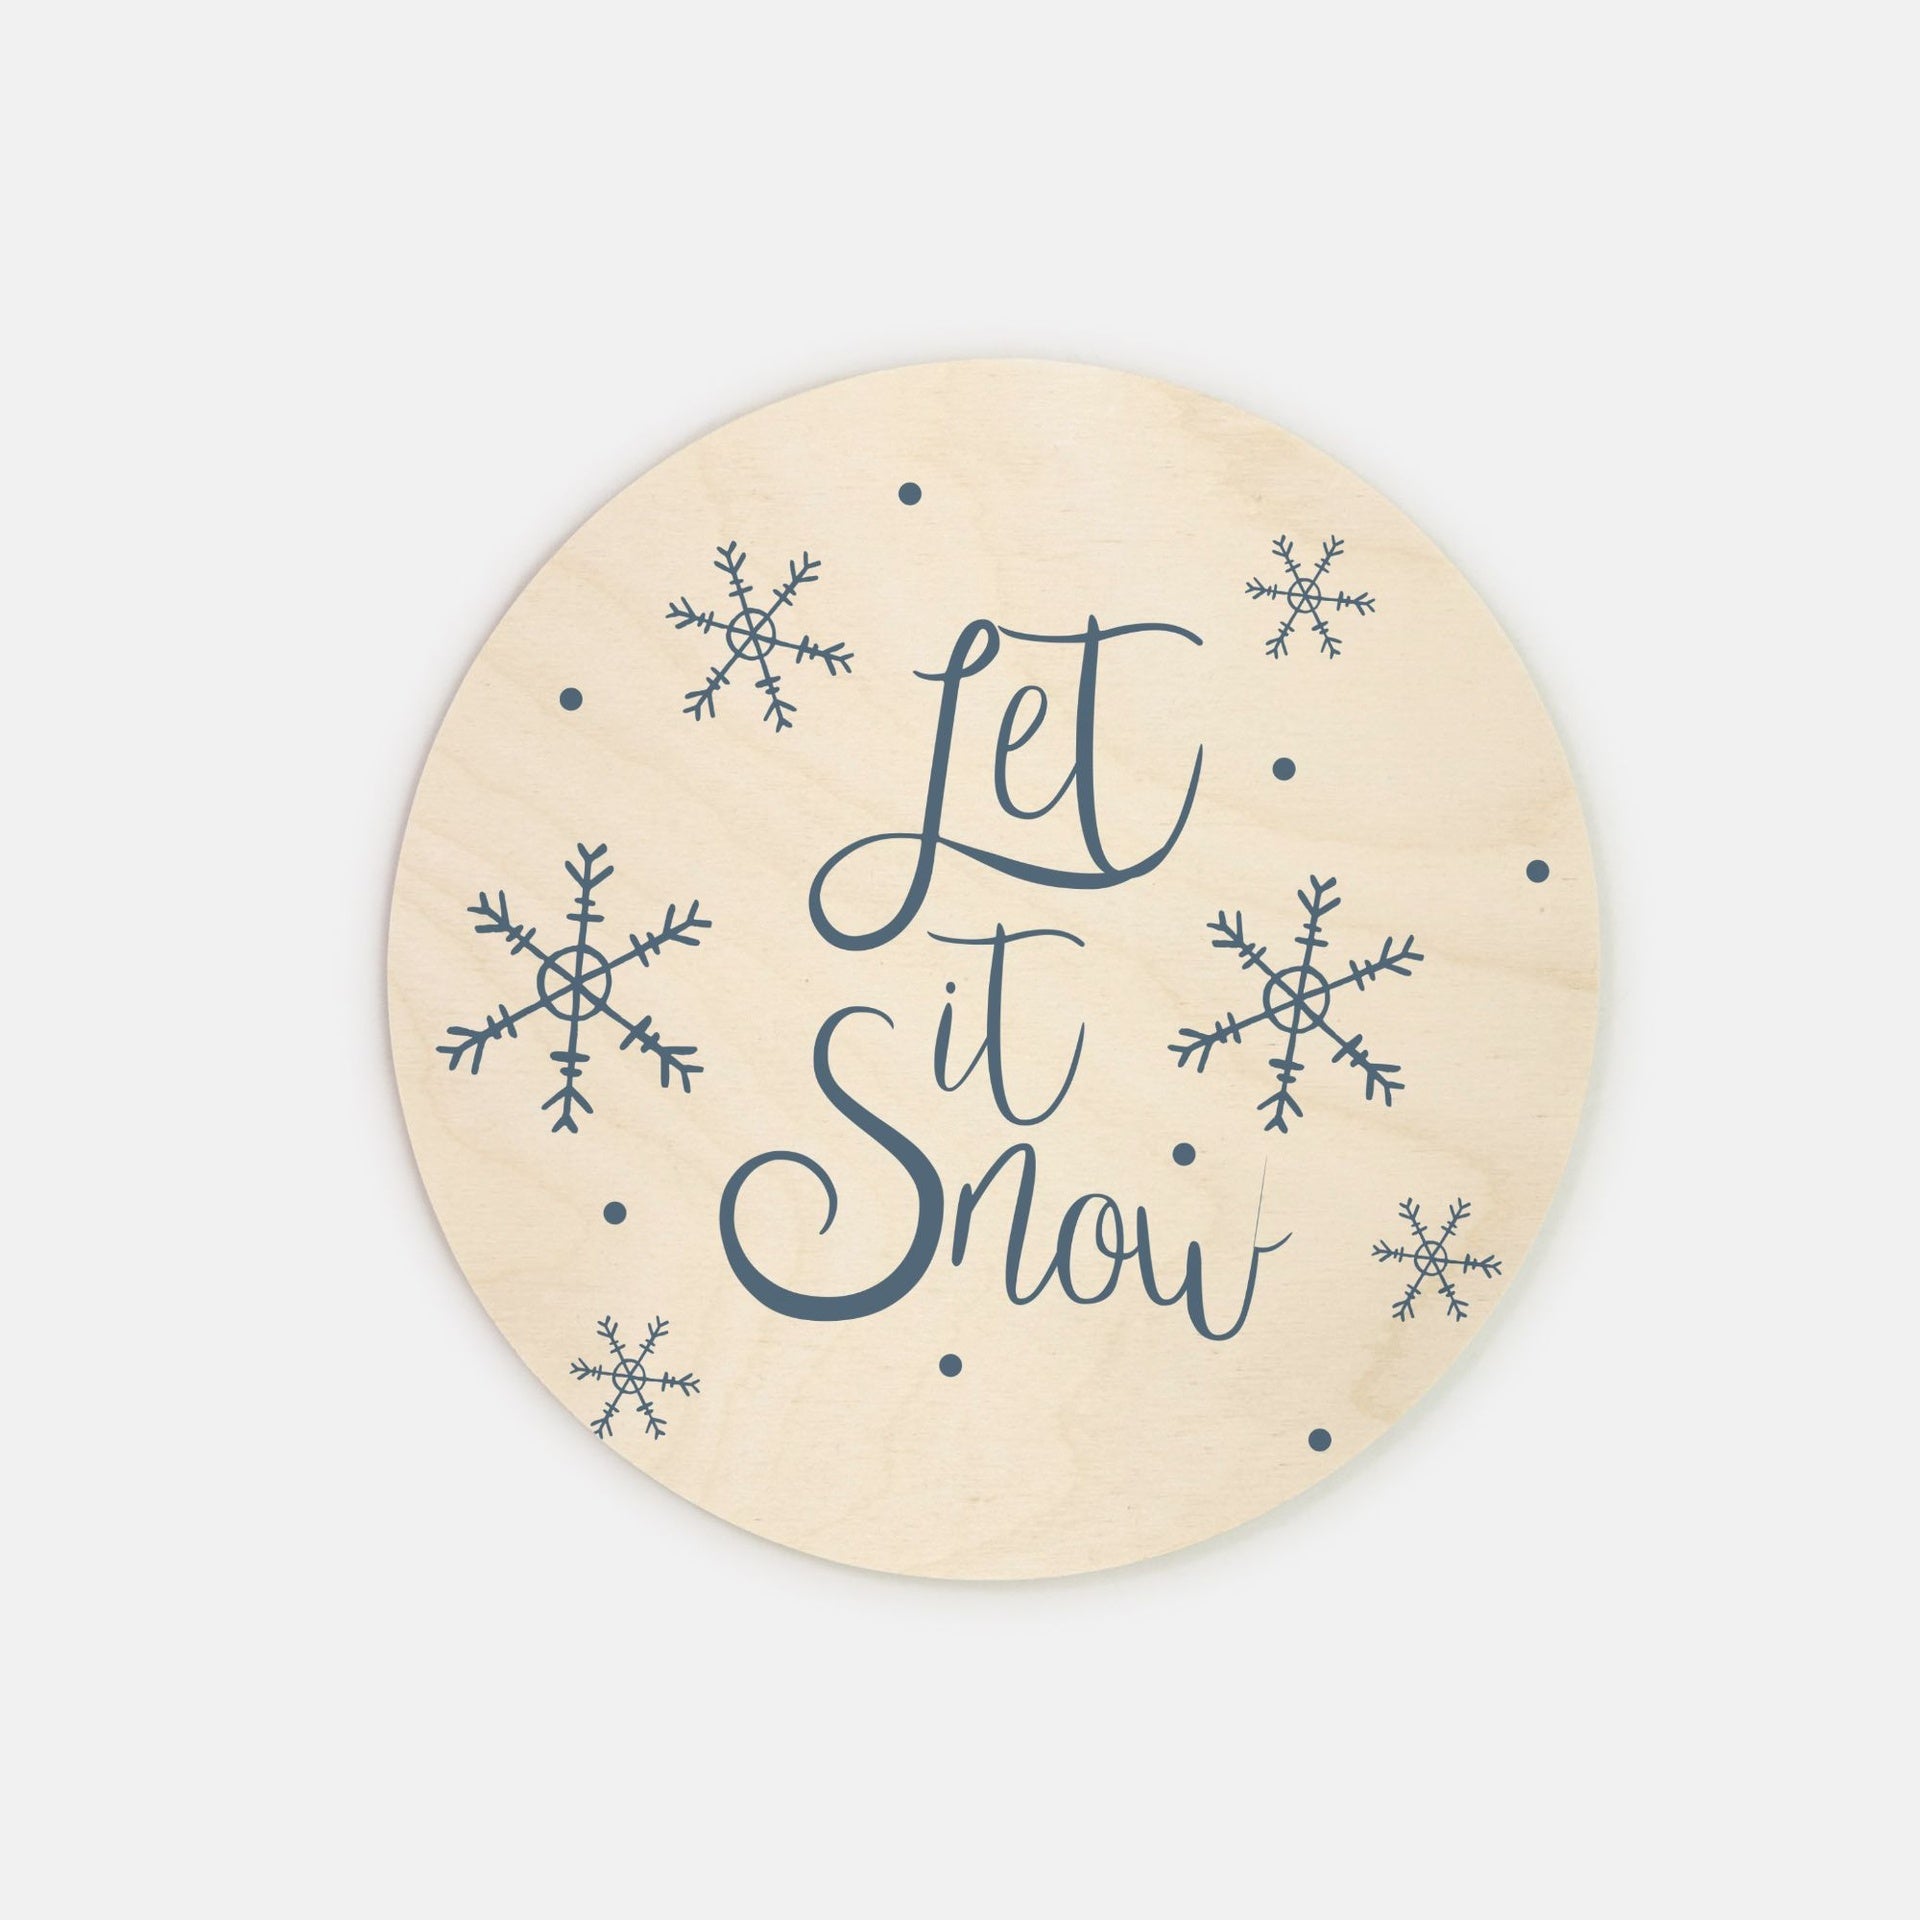 8" Round Wood Sign - Let it Snow